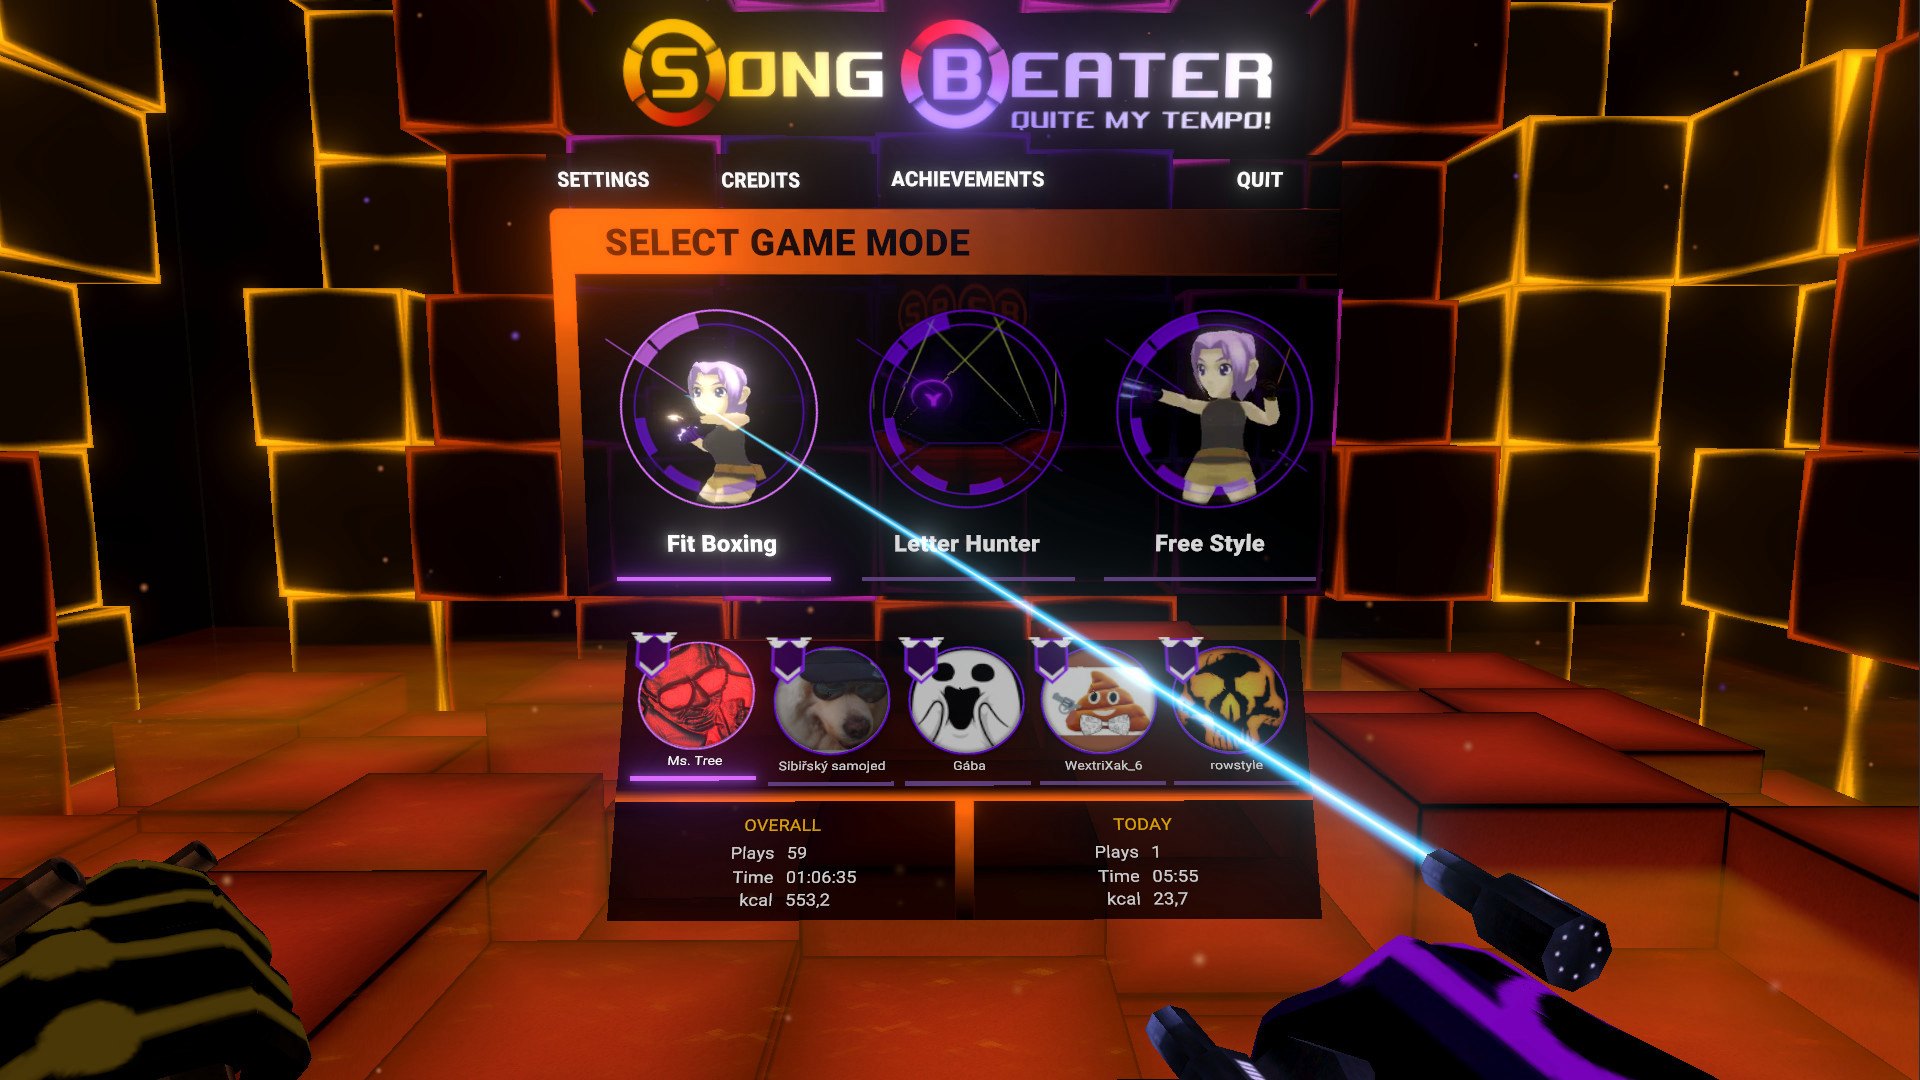 Song Beater: Quite My Tempo! Steam CD Key 3.38 $